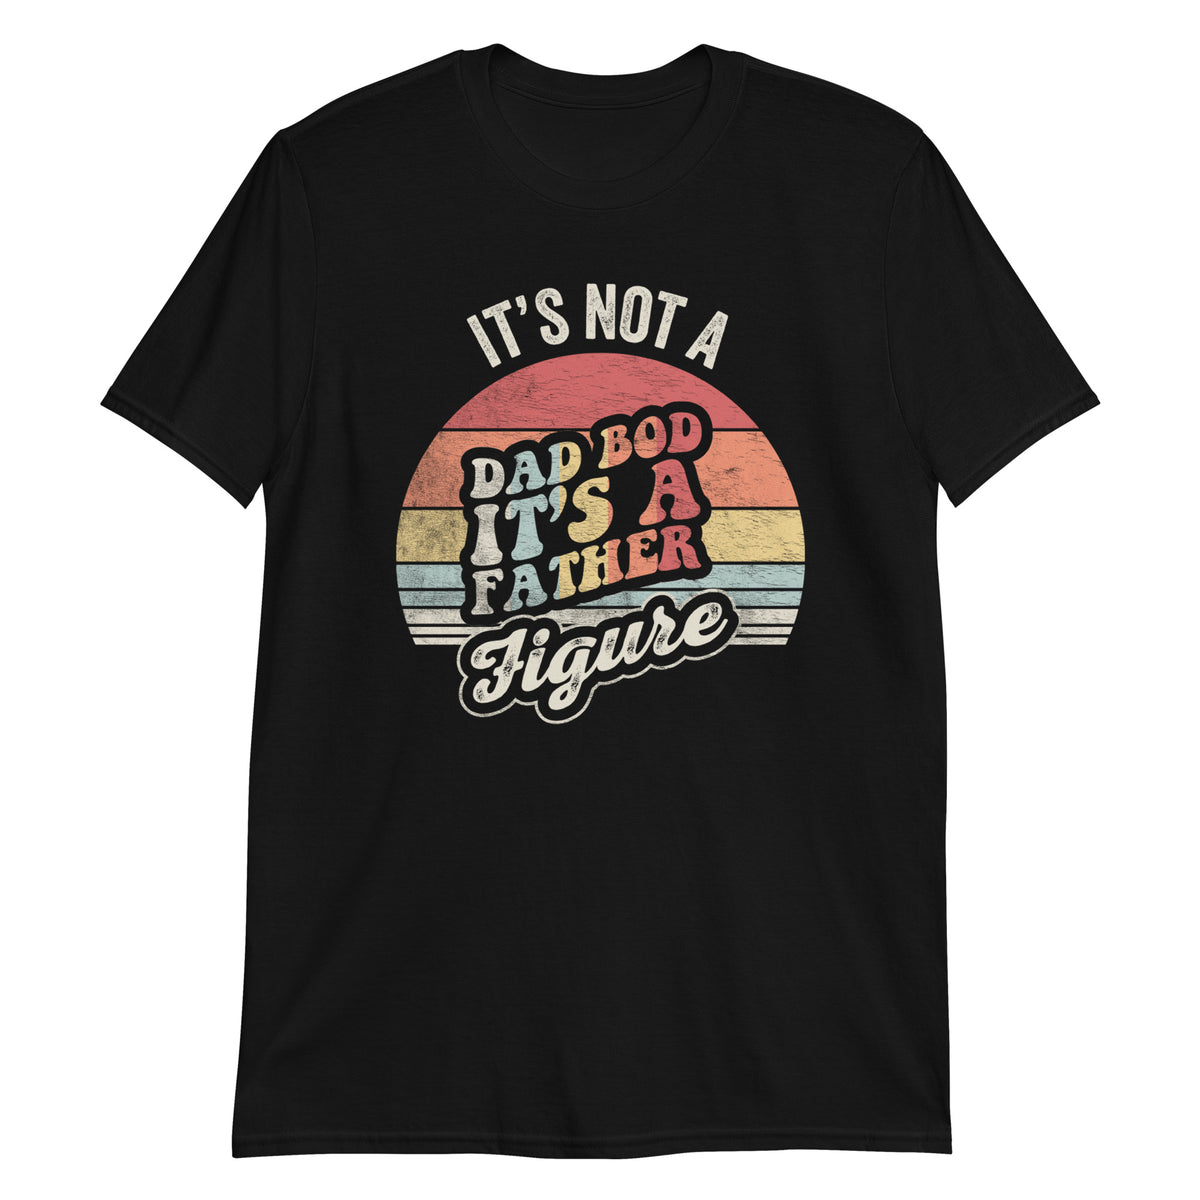 It's Not a Dad Bod it's a Father Figure T-Shirt